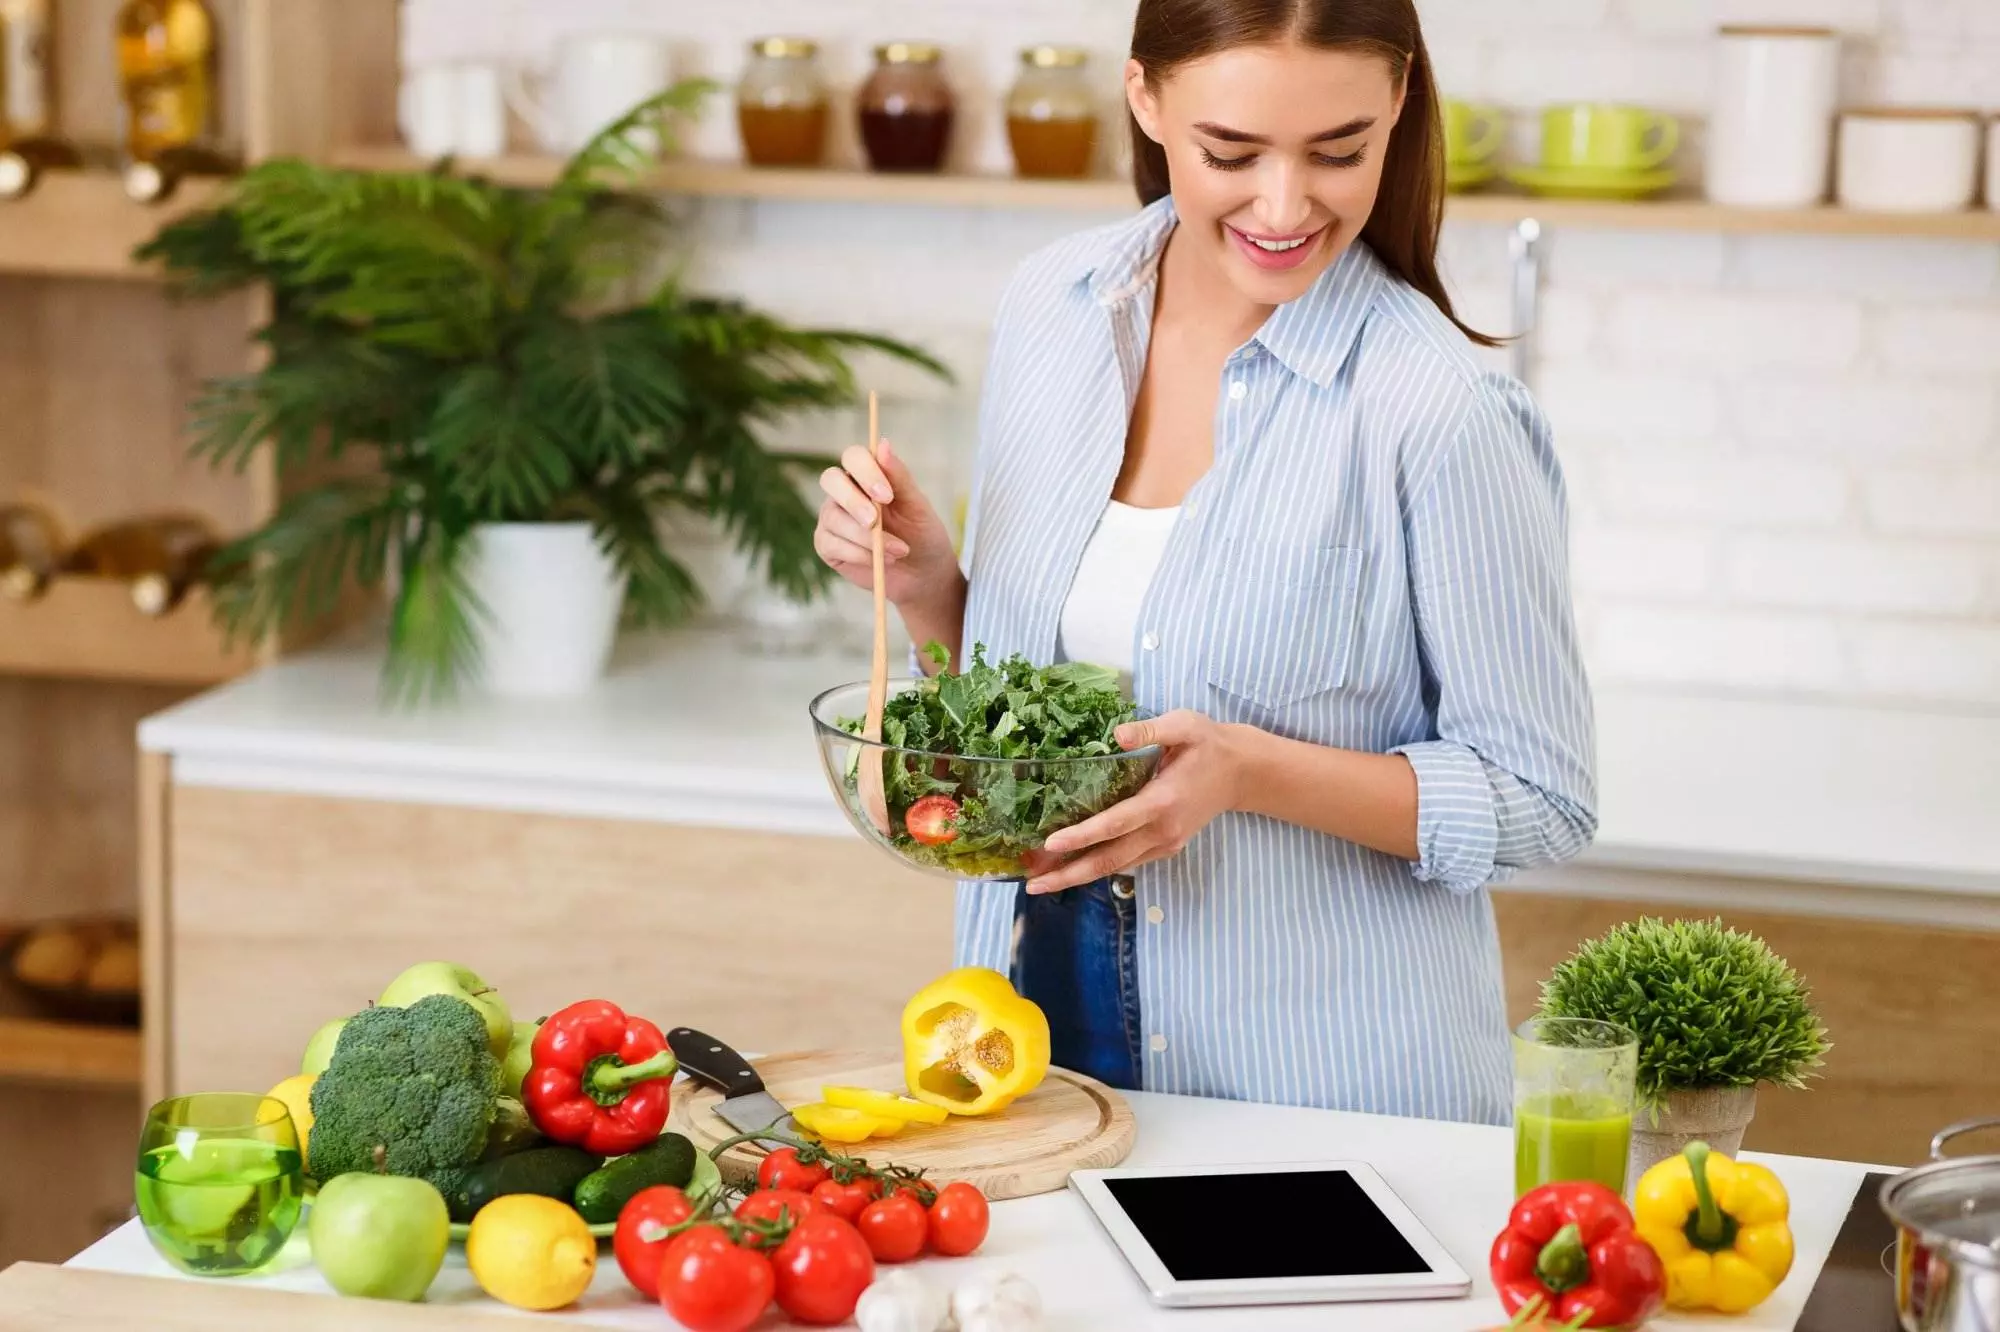 Woman Cooking Salad, Looking For Recipe On Tablet Online. Keto healthy concept.